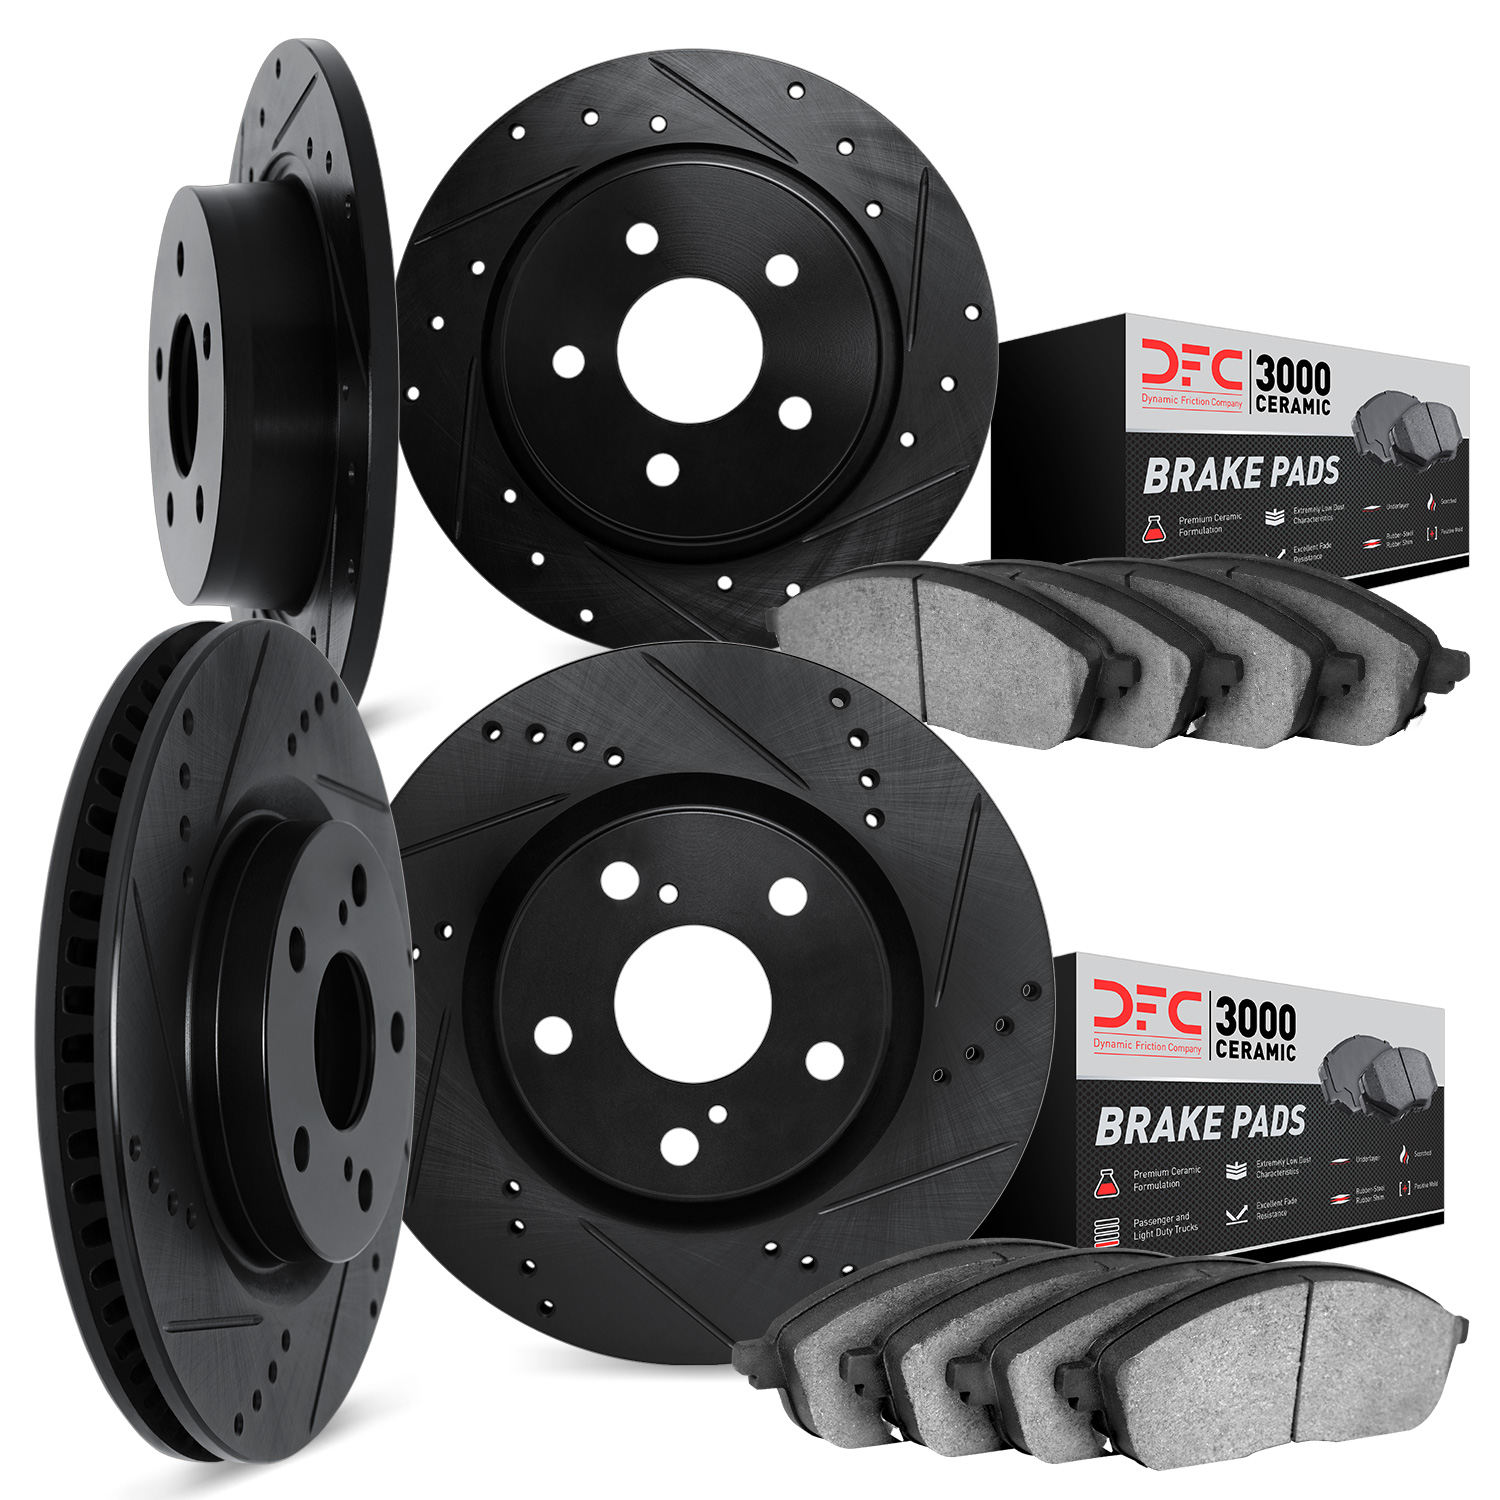 8304-59030 Drilled/Slotted Brake Rotors with 3000-Series Ceramic Brake Pads Kit [Black], 2006-2011 Acura/Honda, Position: Front